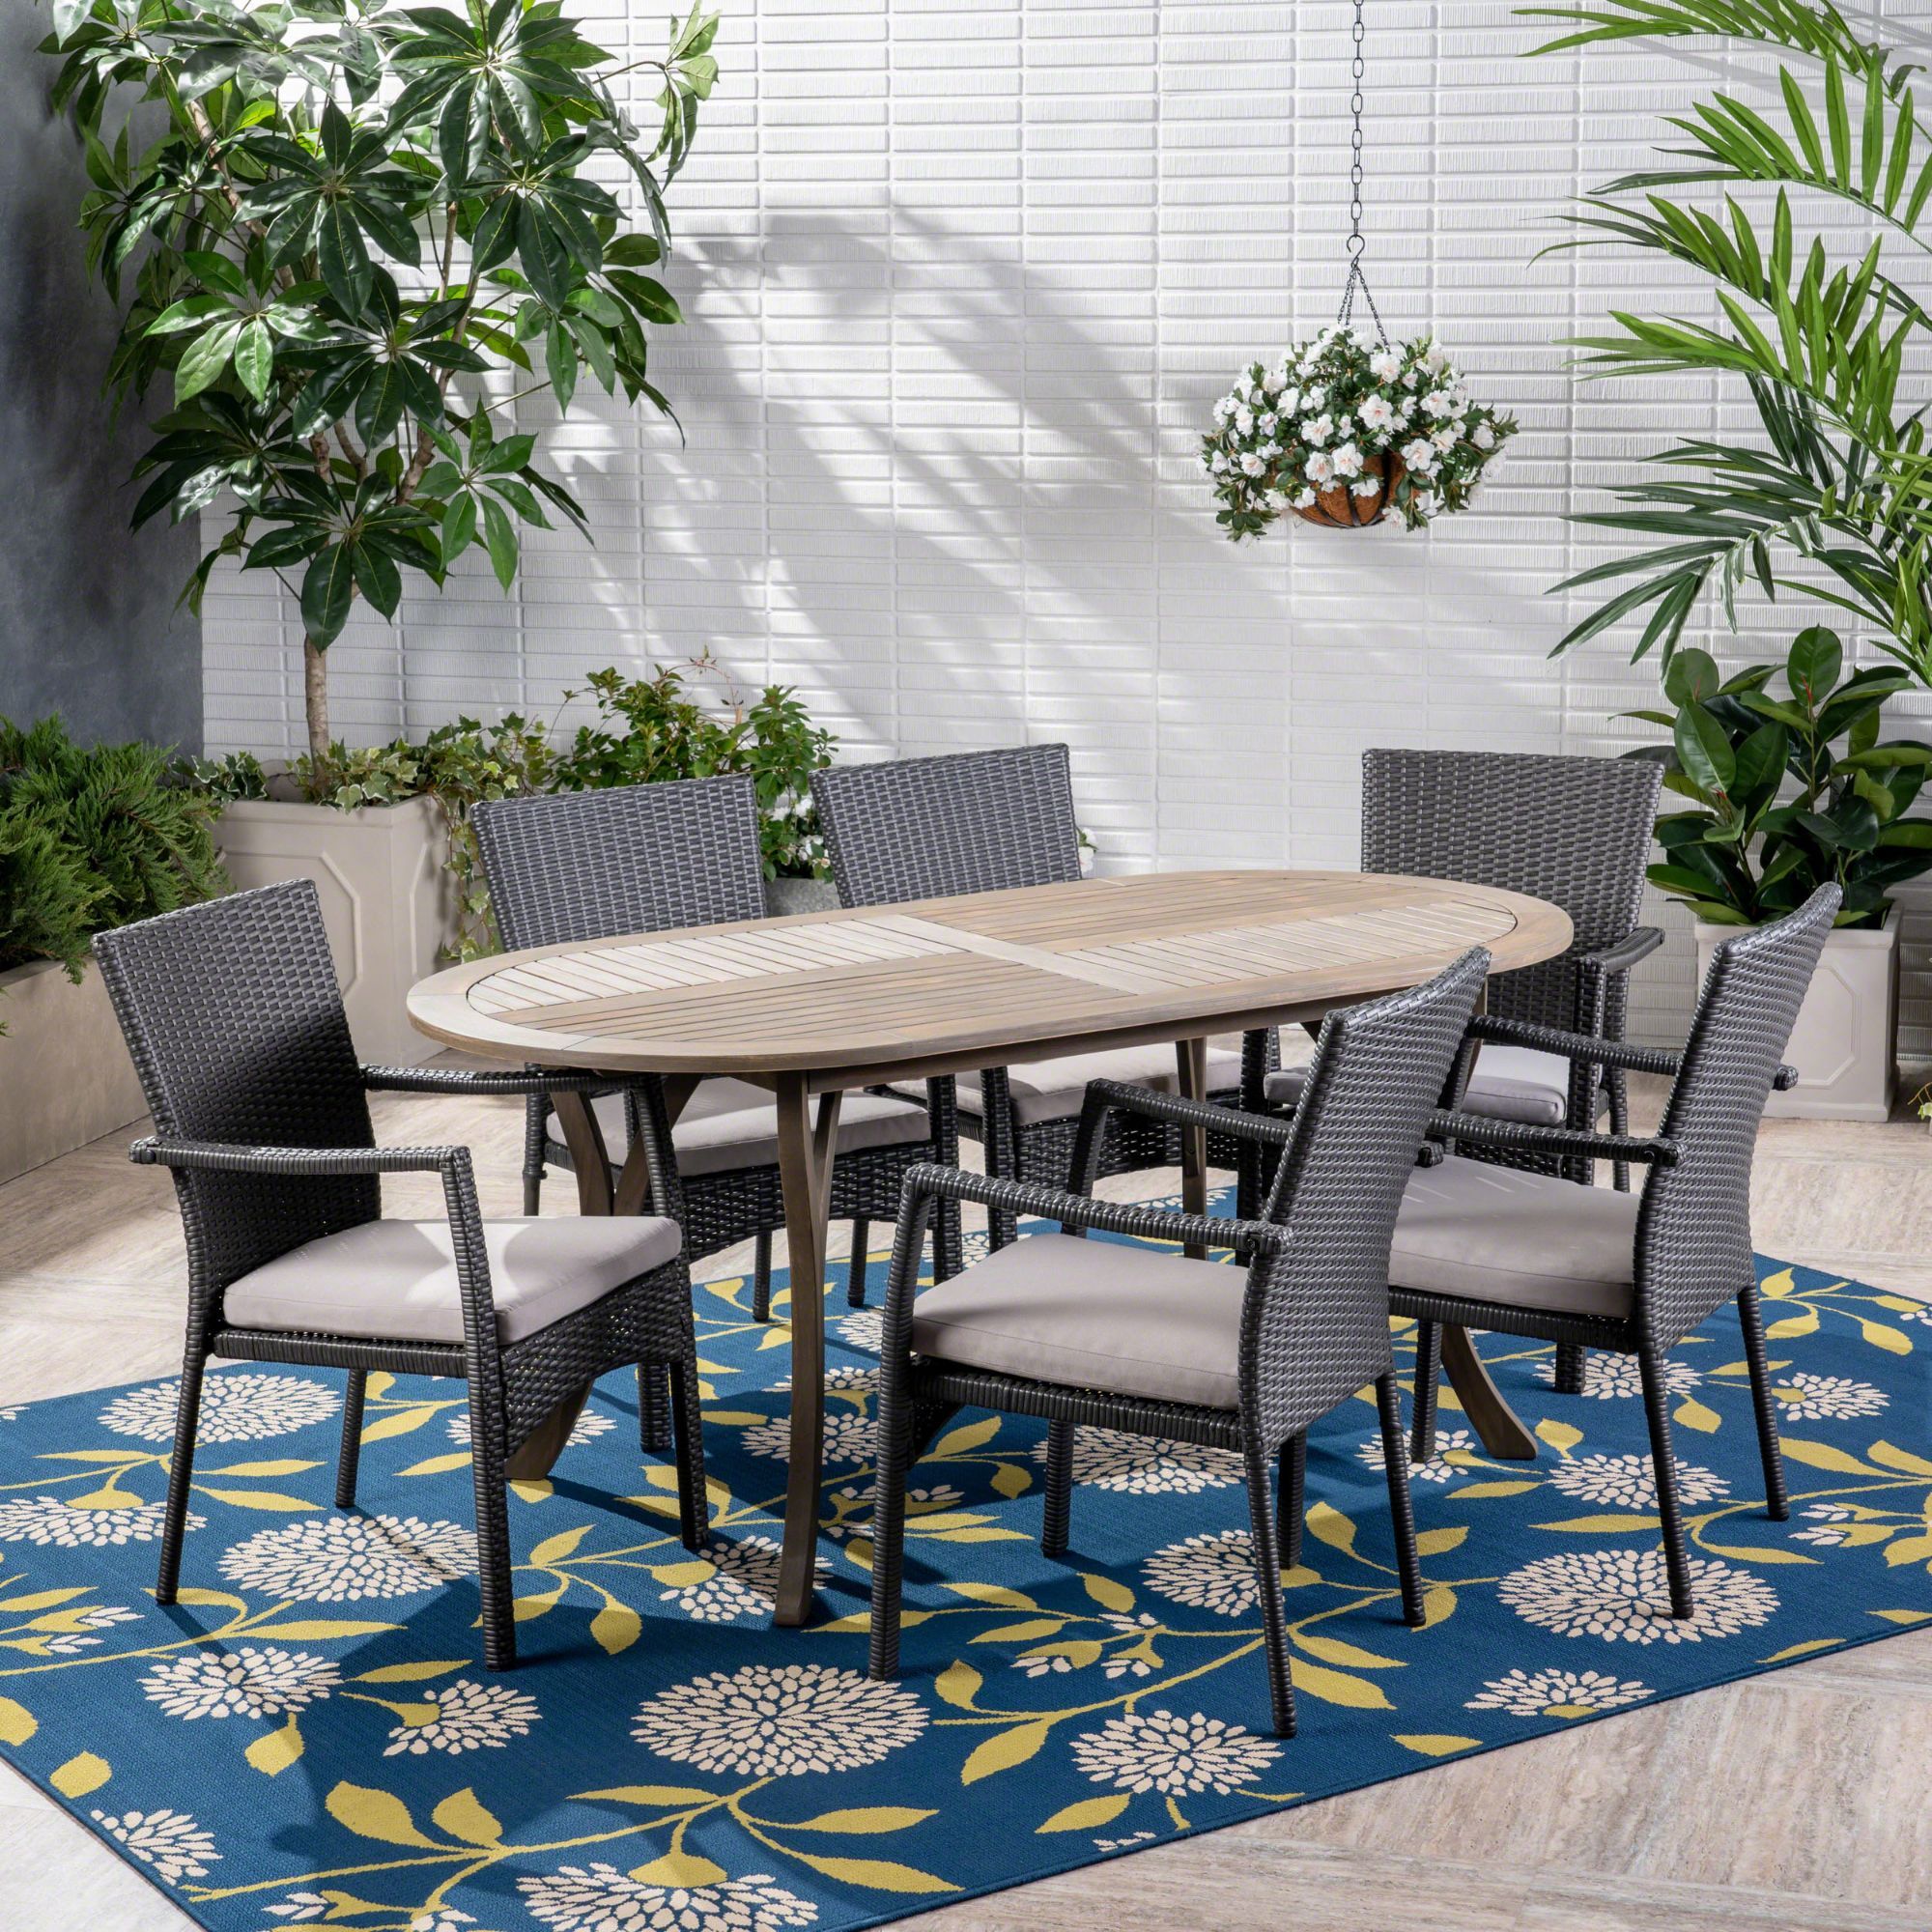 7 Piece Contemporary Outdoor Furniture Patio Dining Set – Gray Cushions With 7 Piece Patio Dining Sets (View 1 of 15)